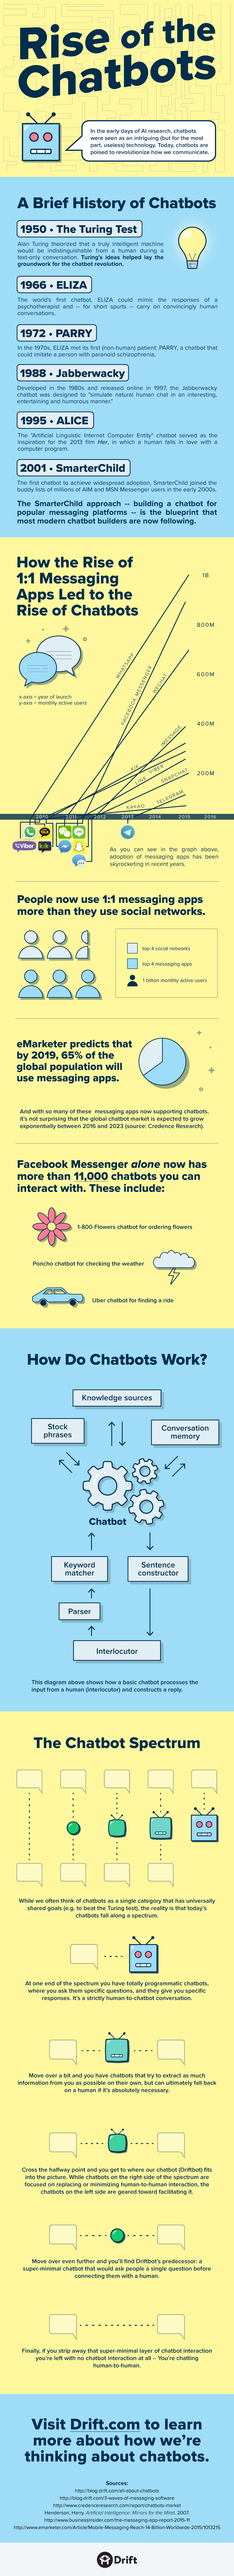 chtbot_infographic.png